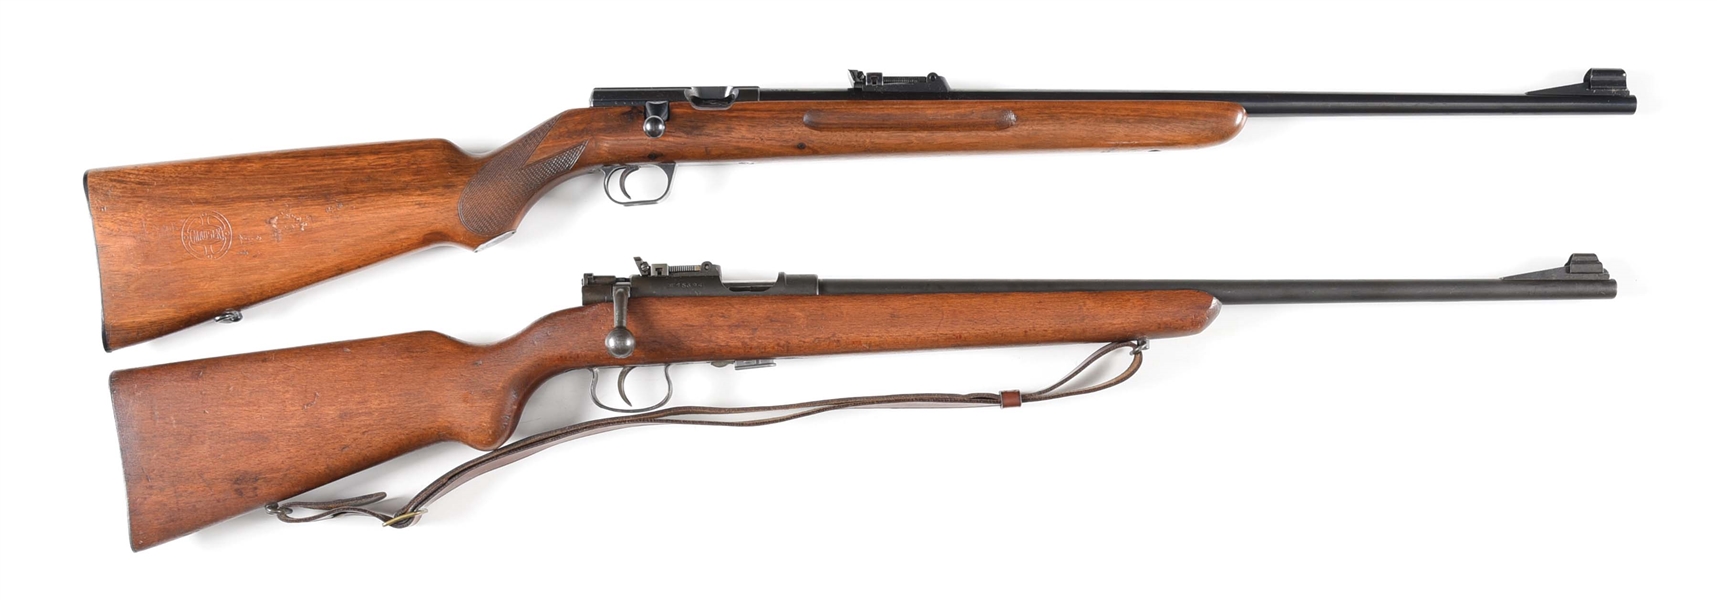 (C) LOT OF 2: MAUSER TRAINER AND FRENCH MAS 45 BOLT ACTION RIFLES.